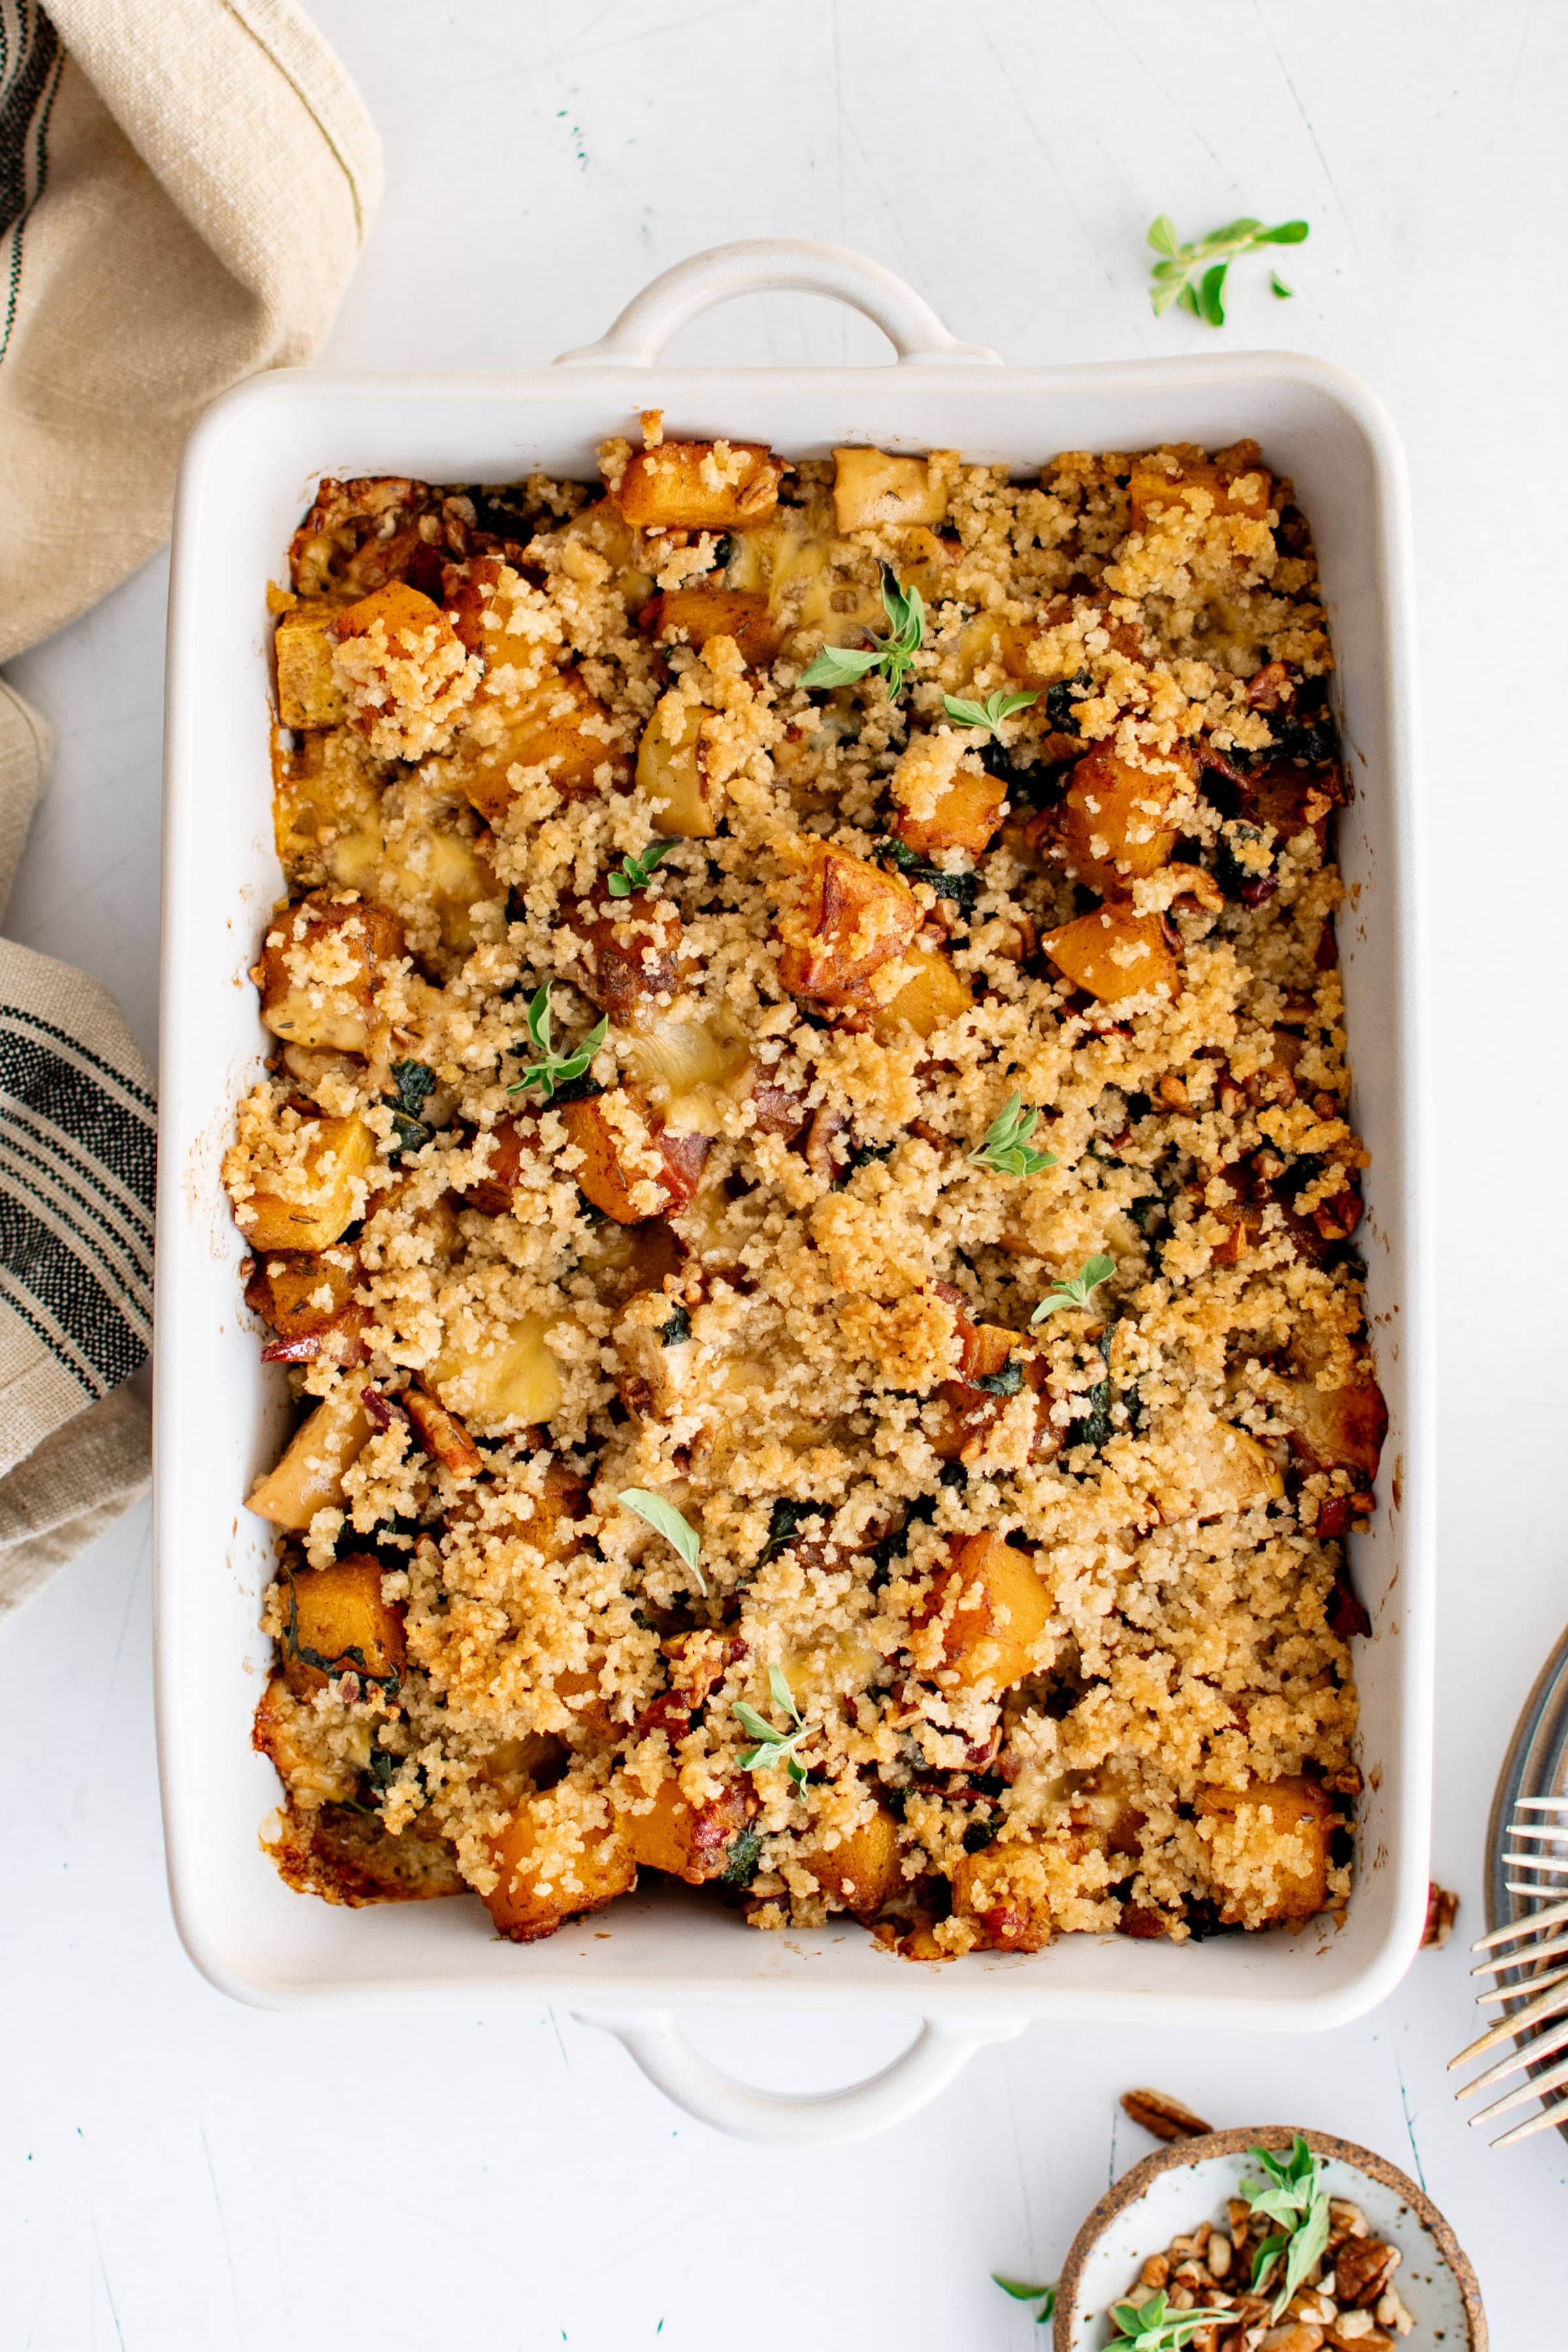 Large white baking dish filled with homemade butternut squash casserole filled with bacon, pecans, kale, apples, and cheese, and topped with maple butter panko breadcrumbs.